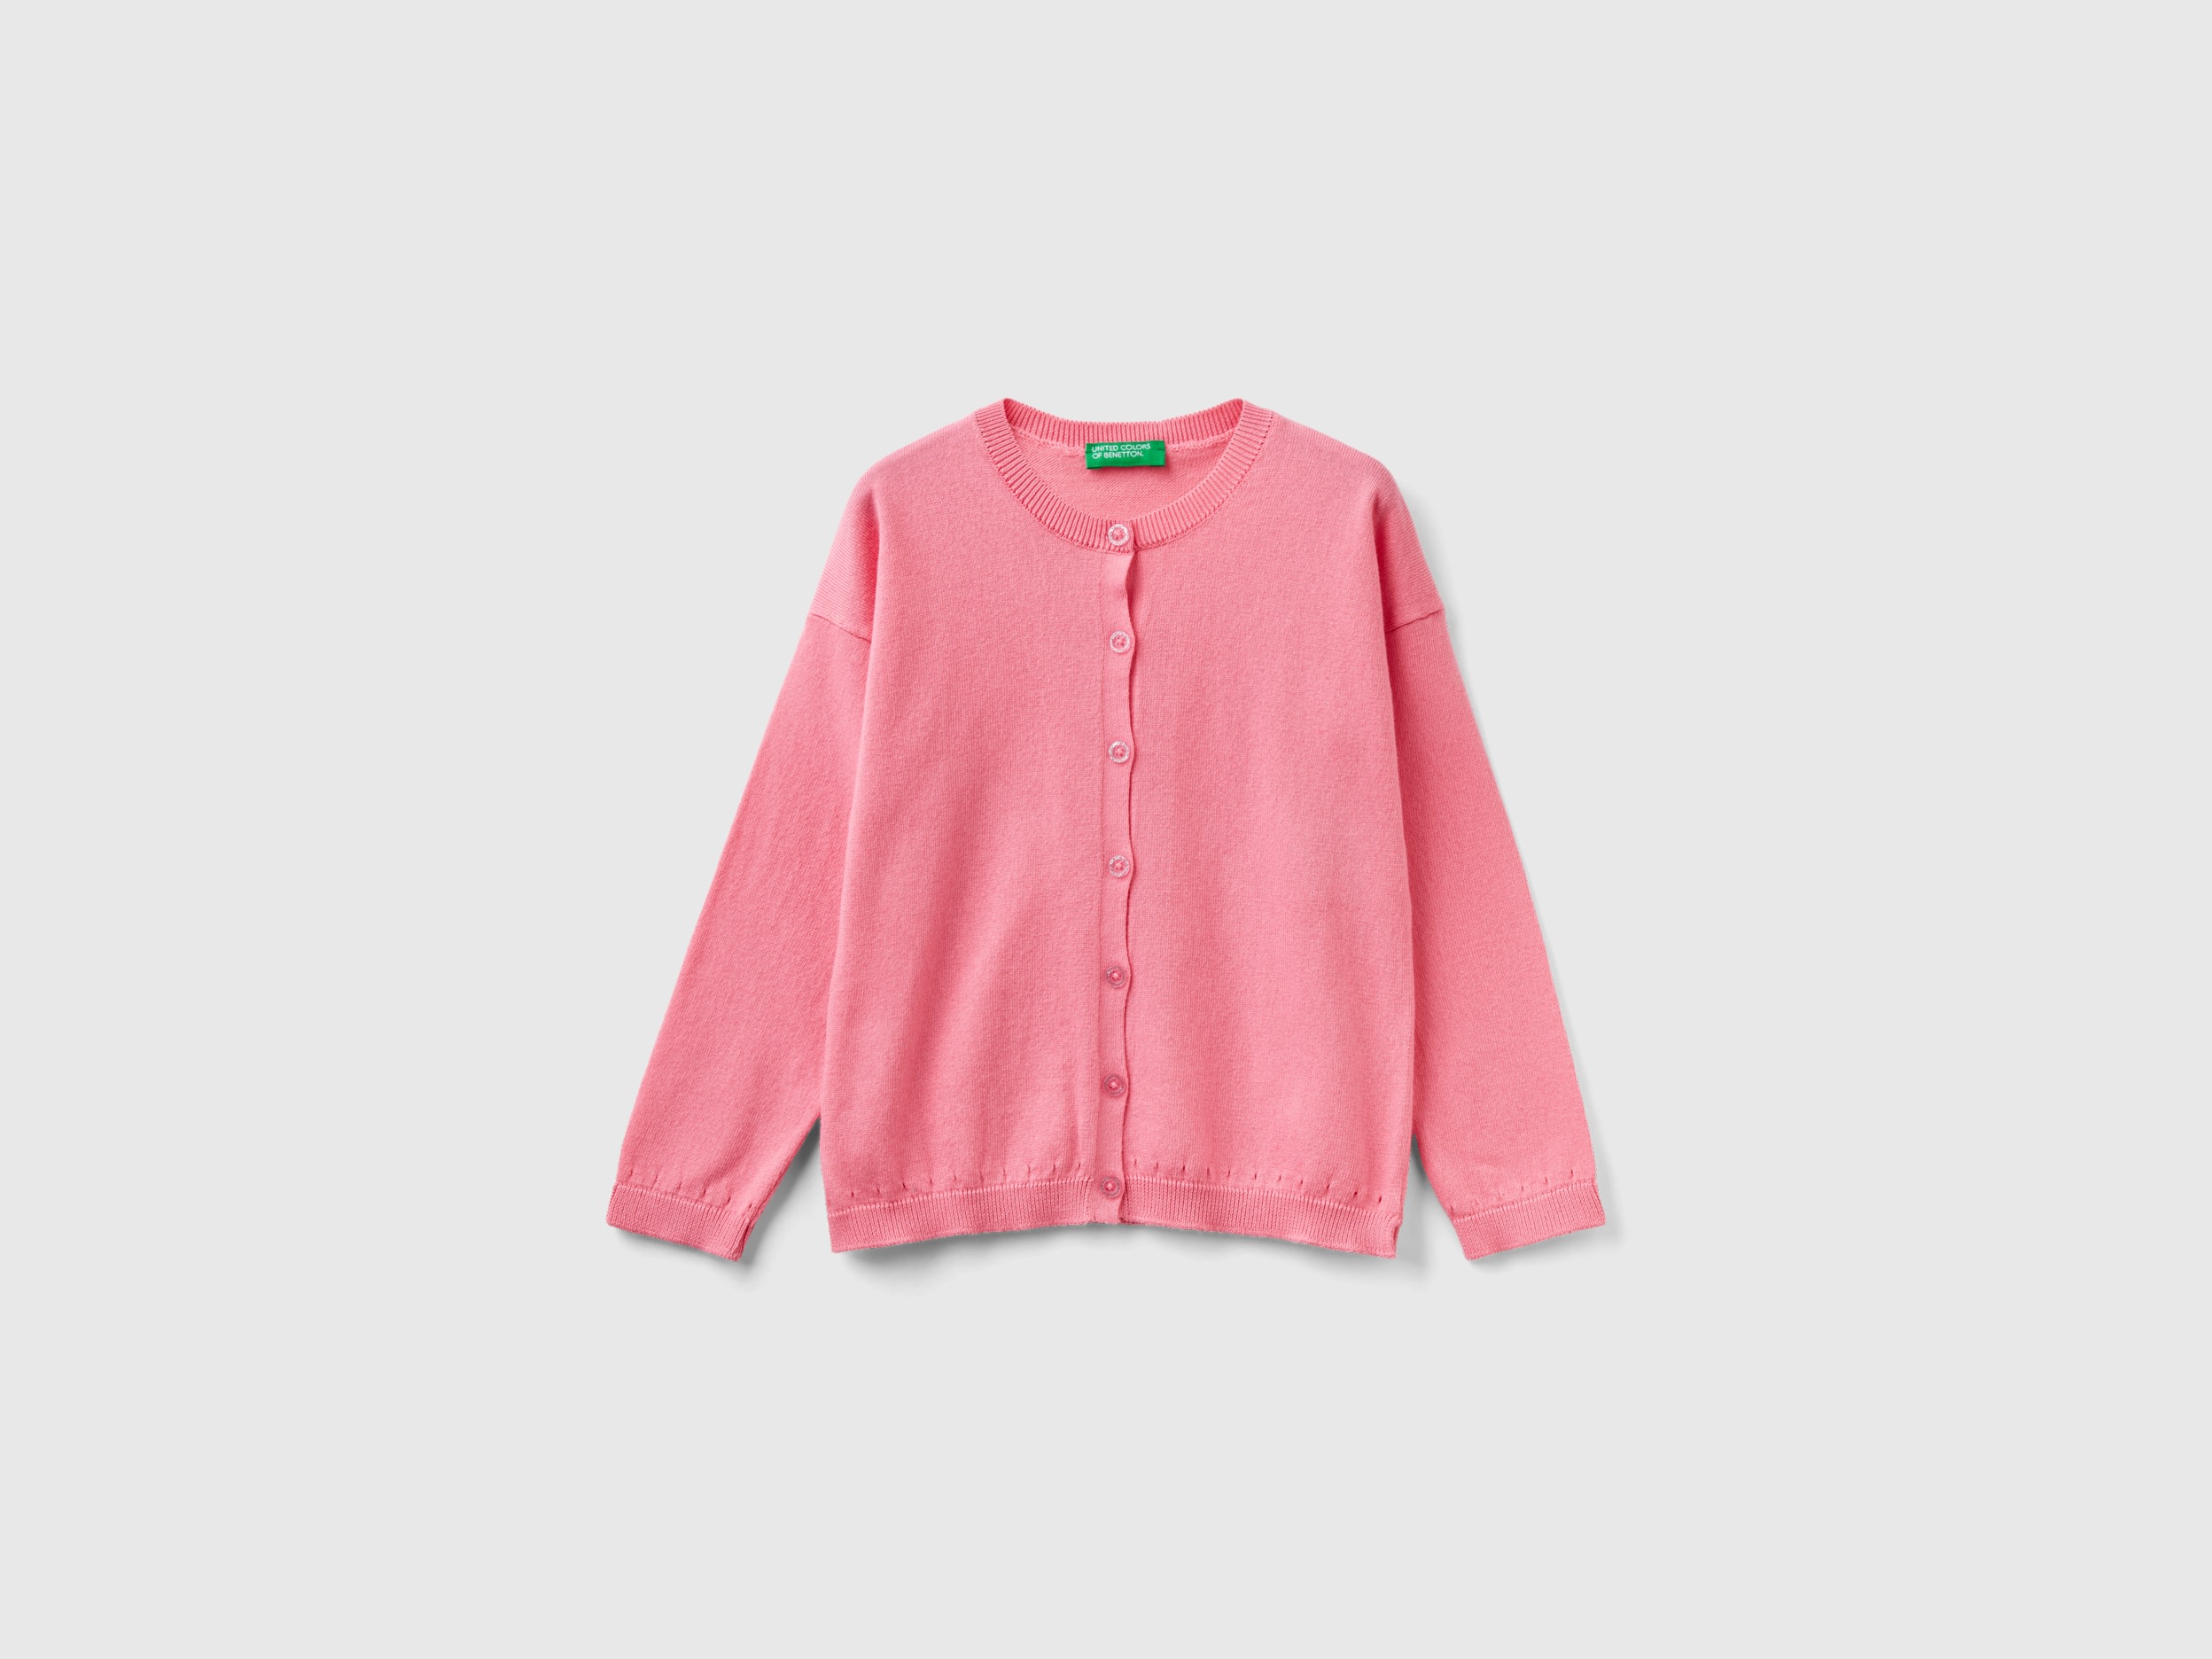 Benetton, Cardigan With Glittery Buttons, size 18-24, Pink, Kids